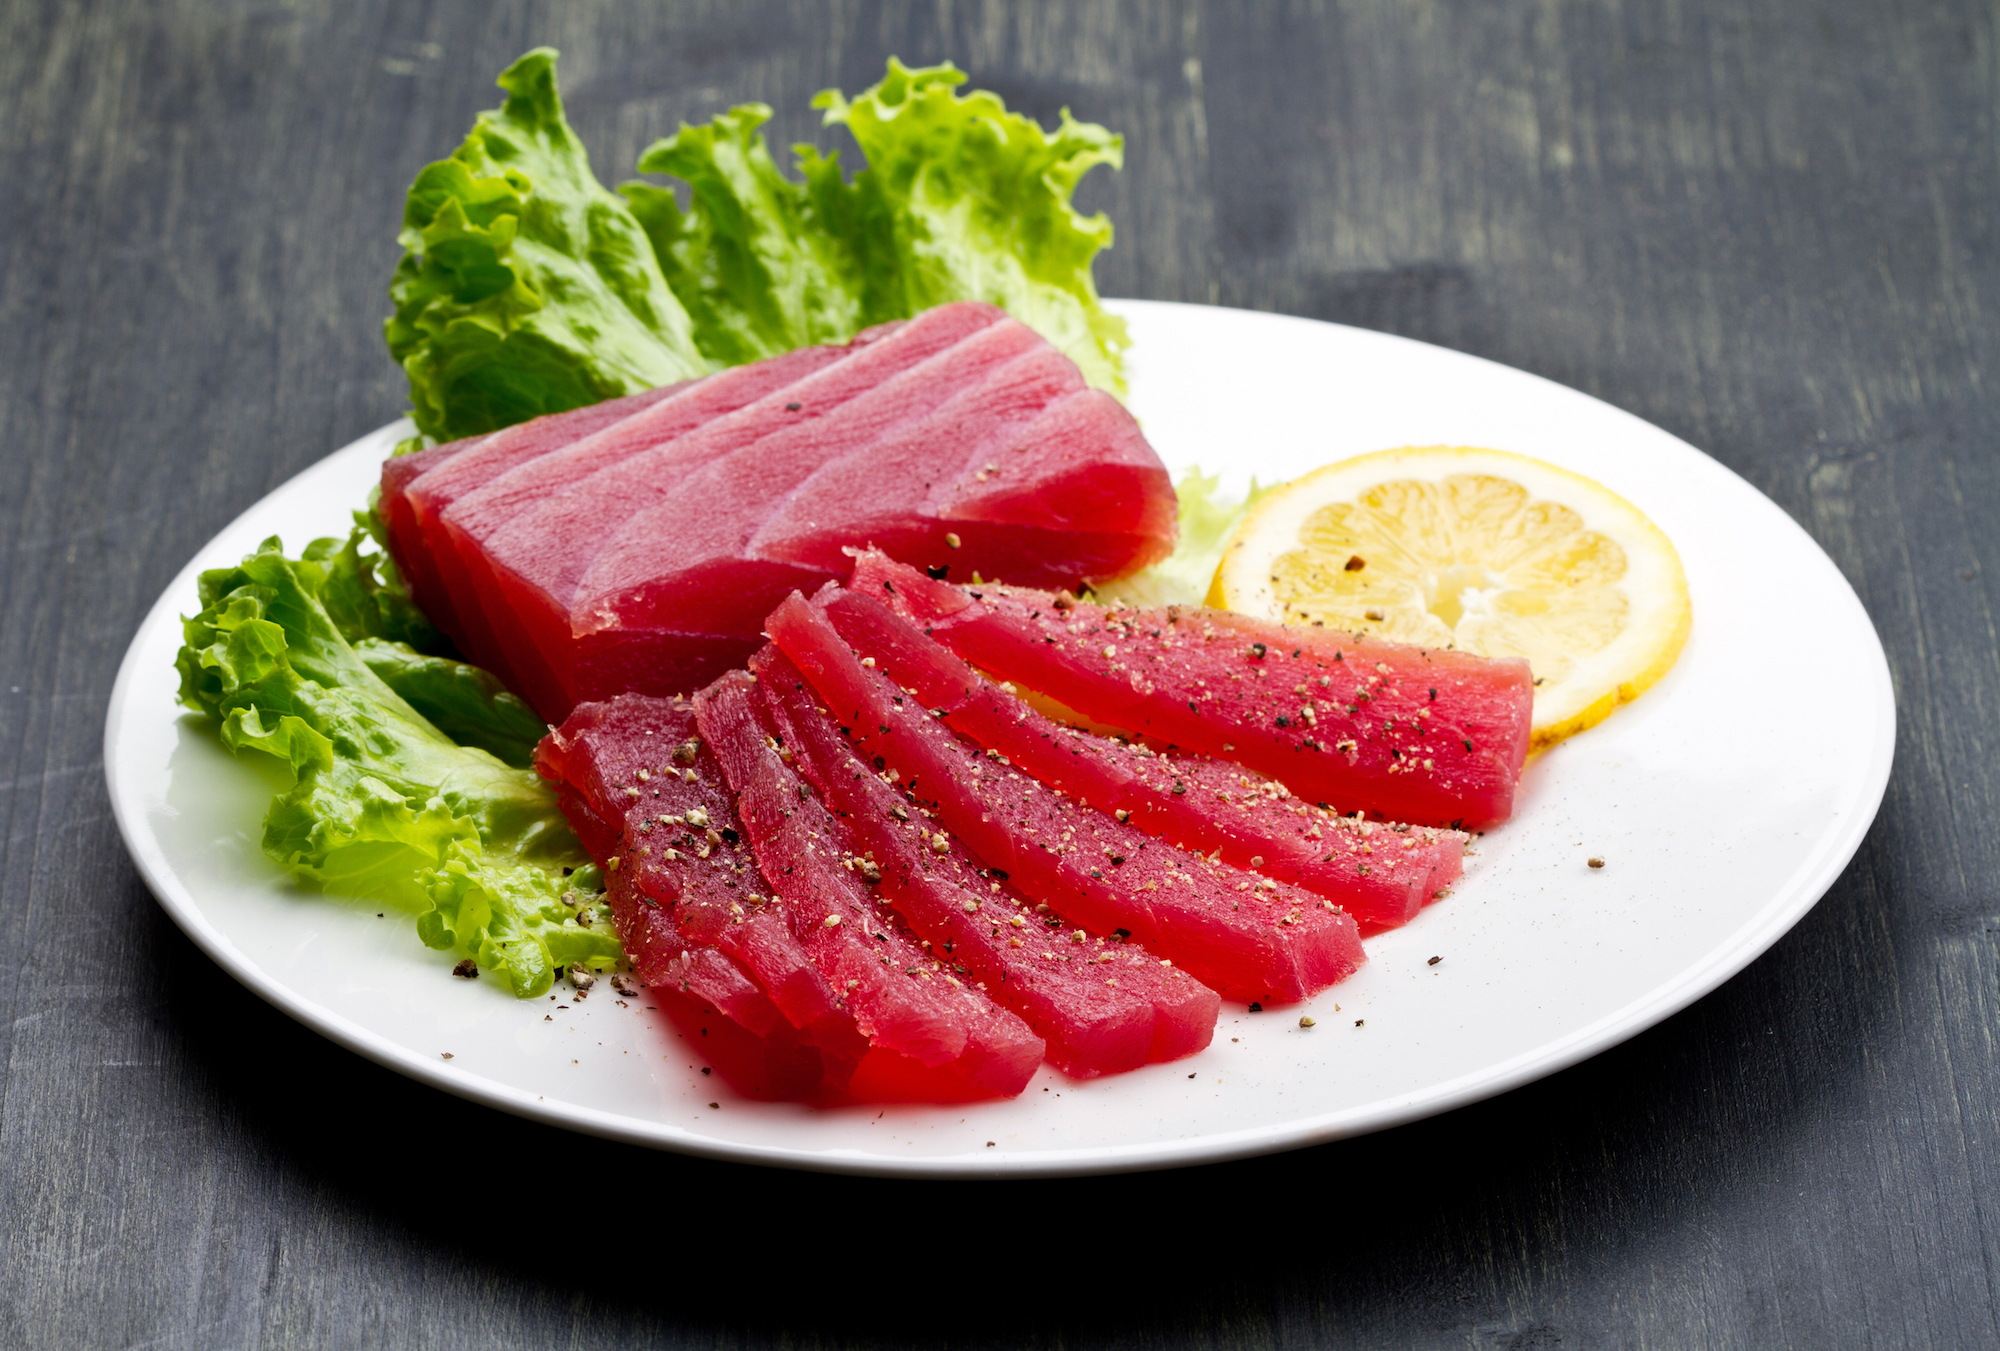 How Much Does Bluefin Tuna Cost? - Luxury Viewer